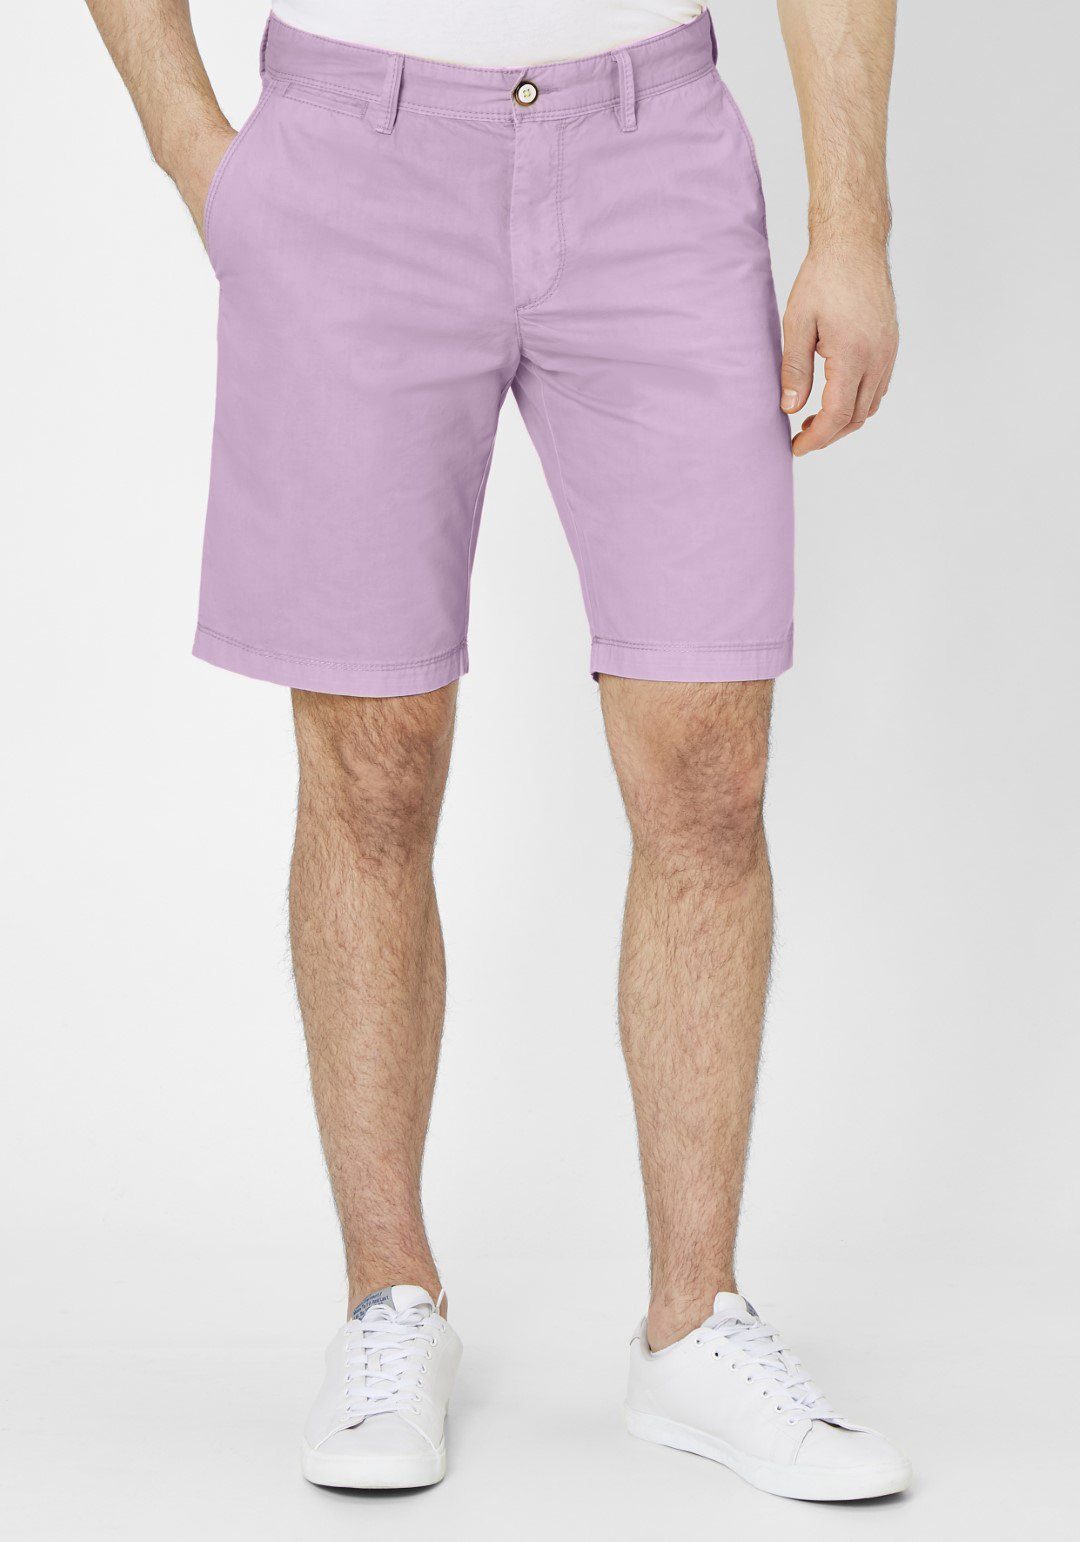 Redpoint Chinoshorts Surray Moderne Chino Bermudas - 16 Shades Edition pale lilac